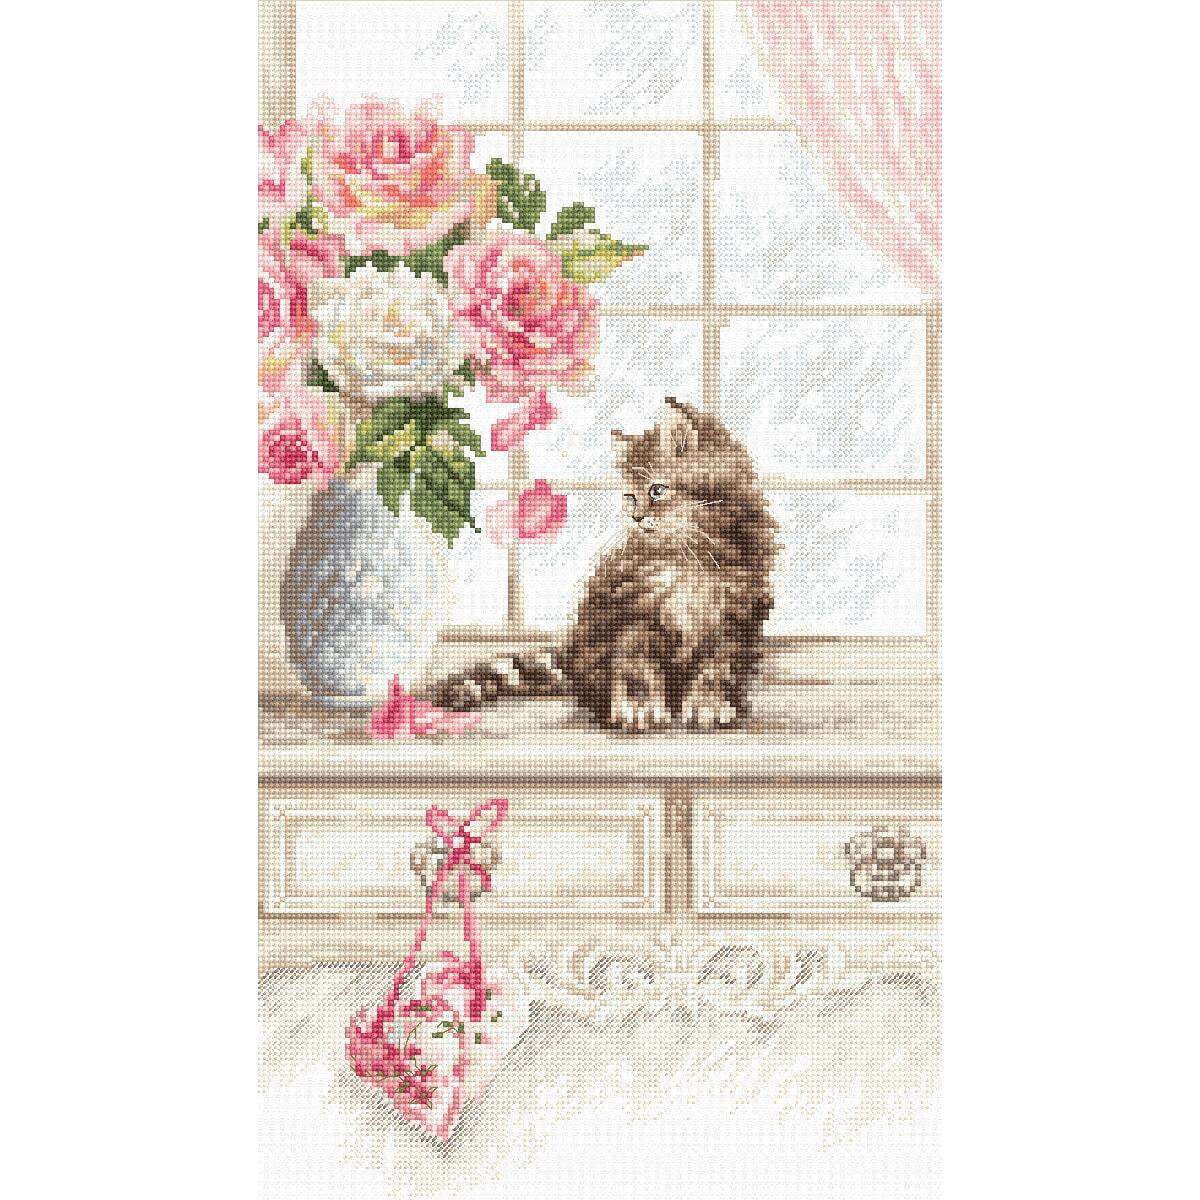 Letistitch counted cross stitch kit "Kitten",...